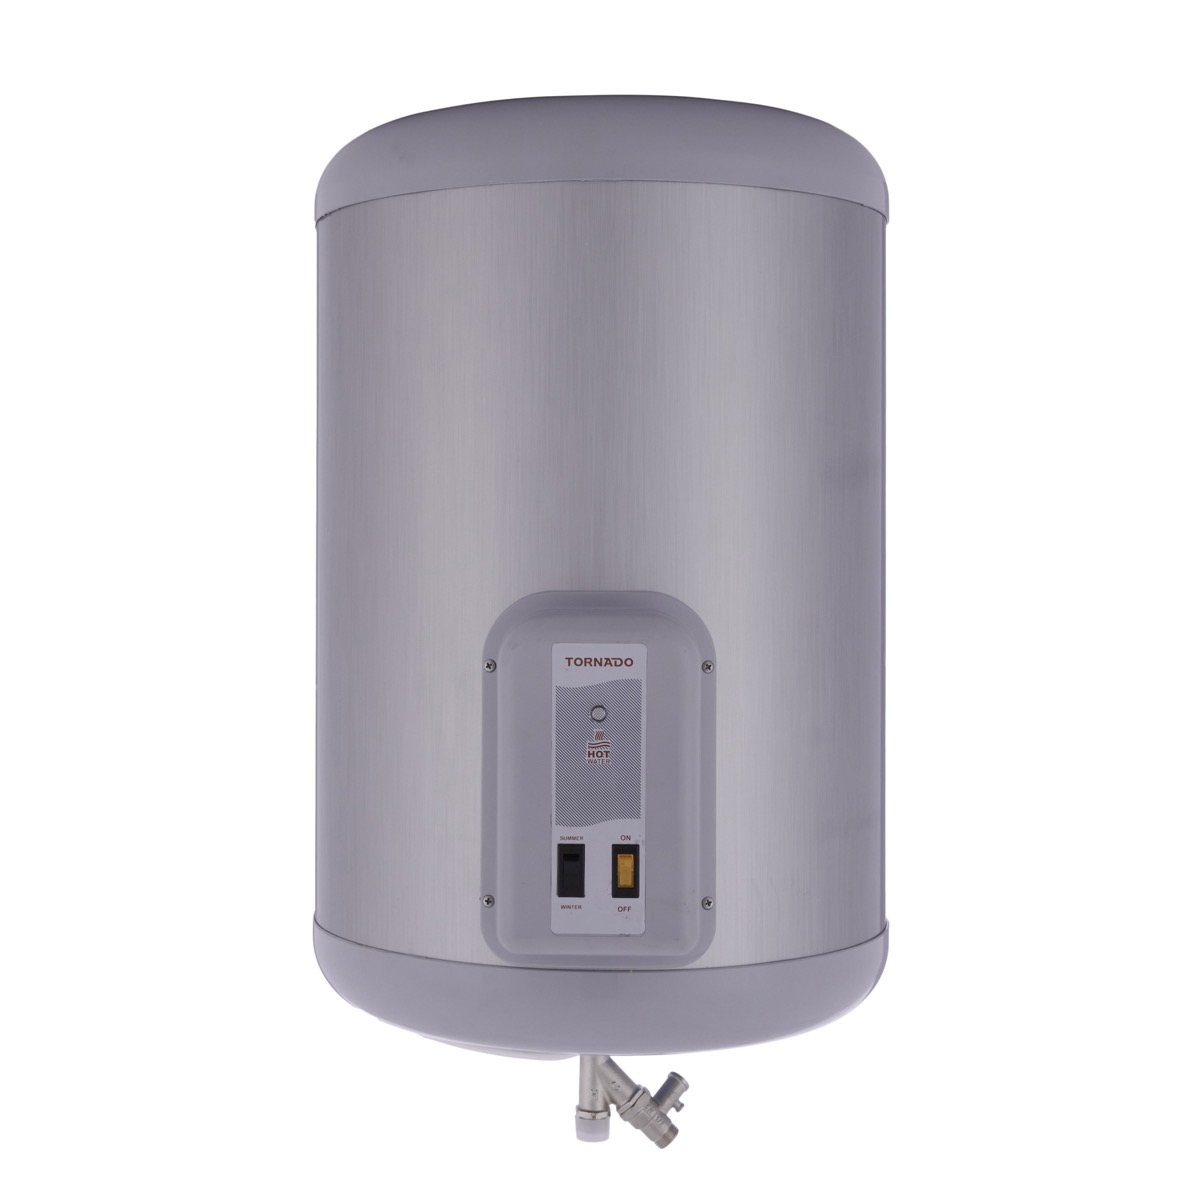 Tornado Electric Water Heater, 65 Litres, Silver- EHA-65TSMS